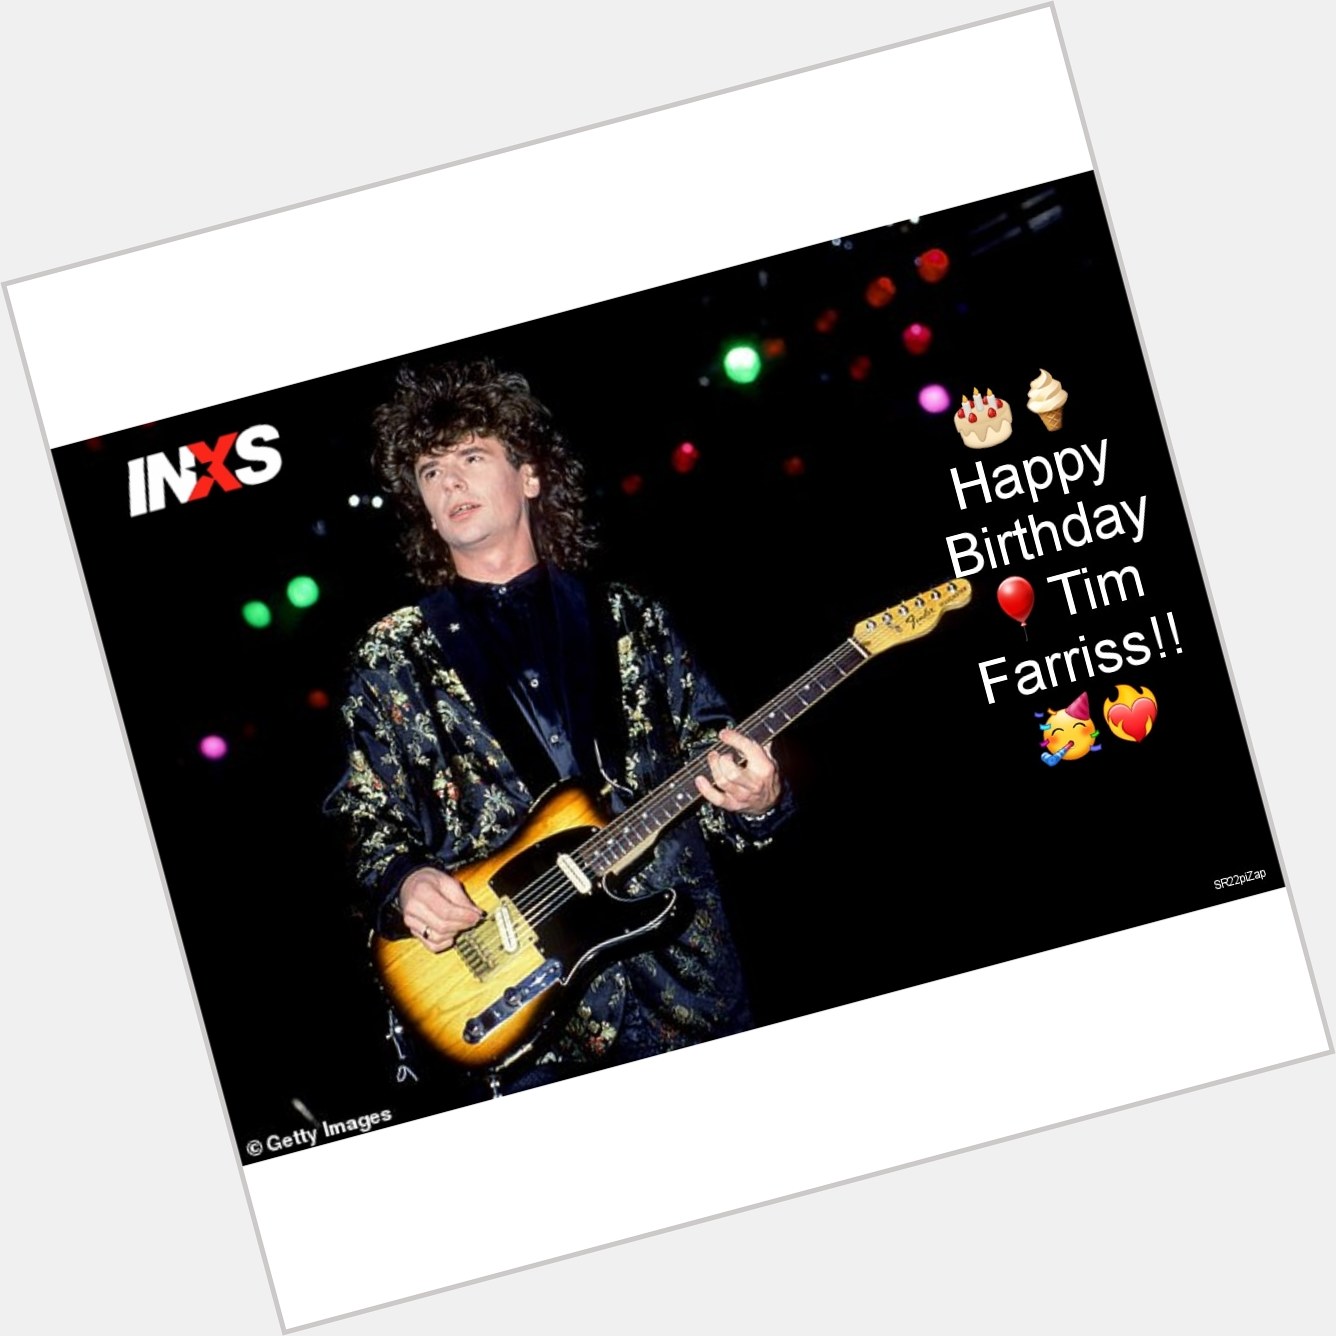     A Very Happy Birthday to Tim Farriss of !!!!    